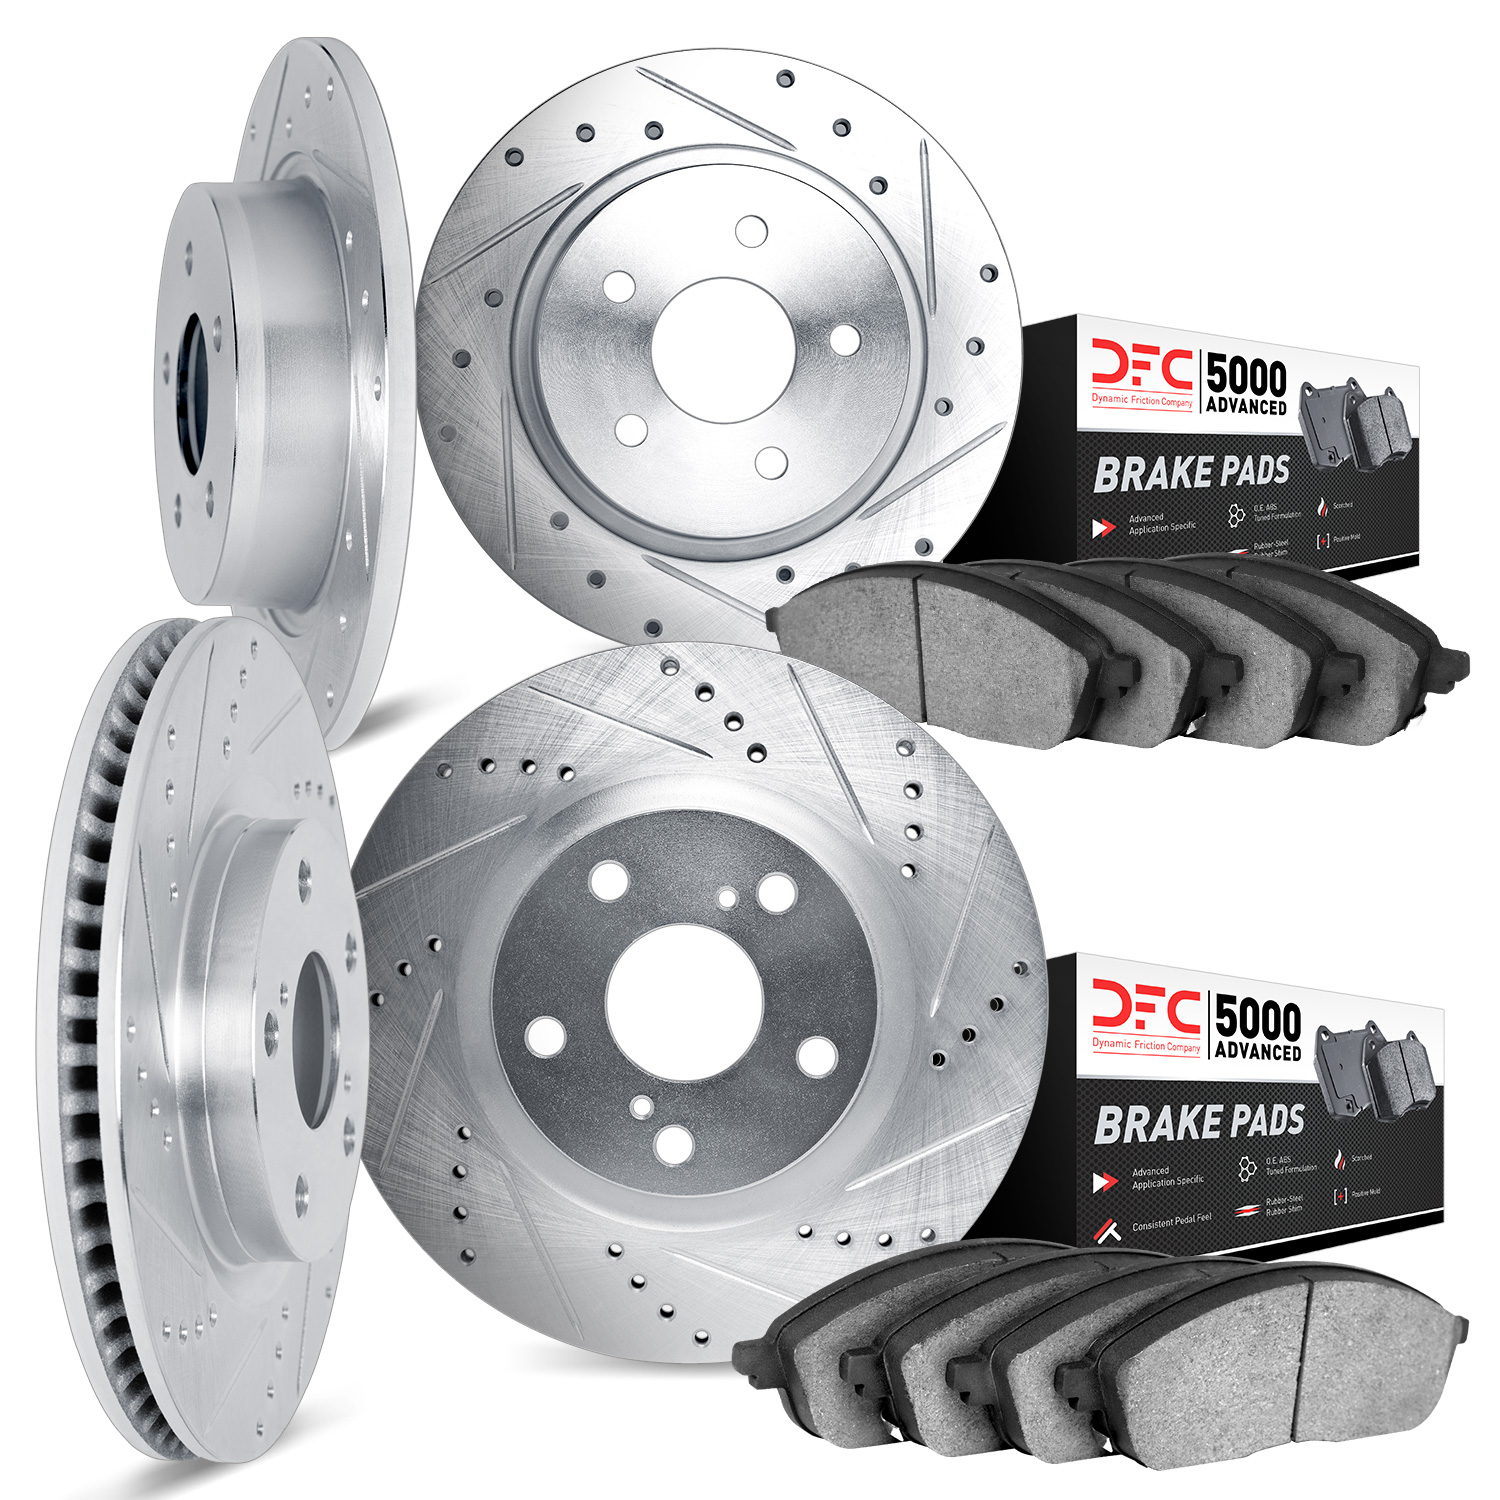 7504-59046 Drilled/Slotted Brake Rotors w/5000 Advanced Brake Pads Kit [Silver], Fits Select Acura/Honda, Position: Front and Re